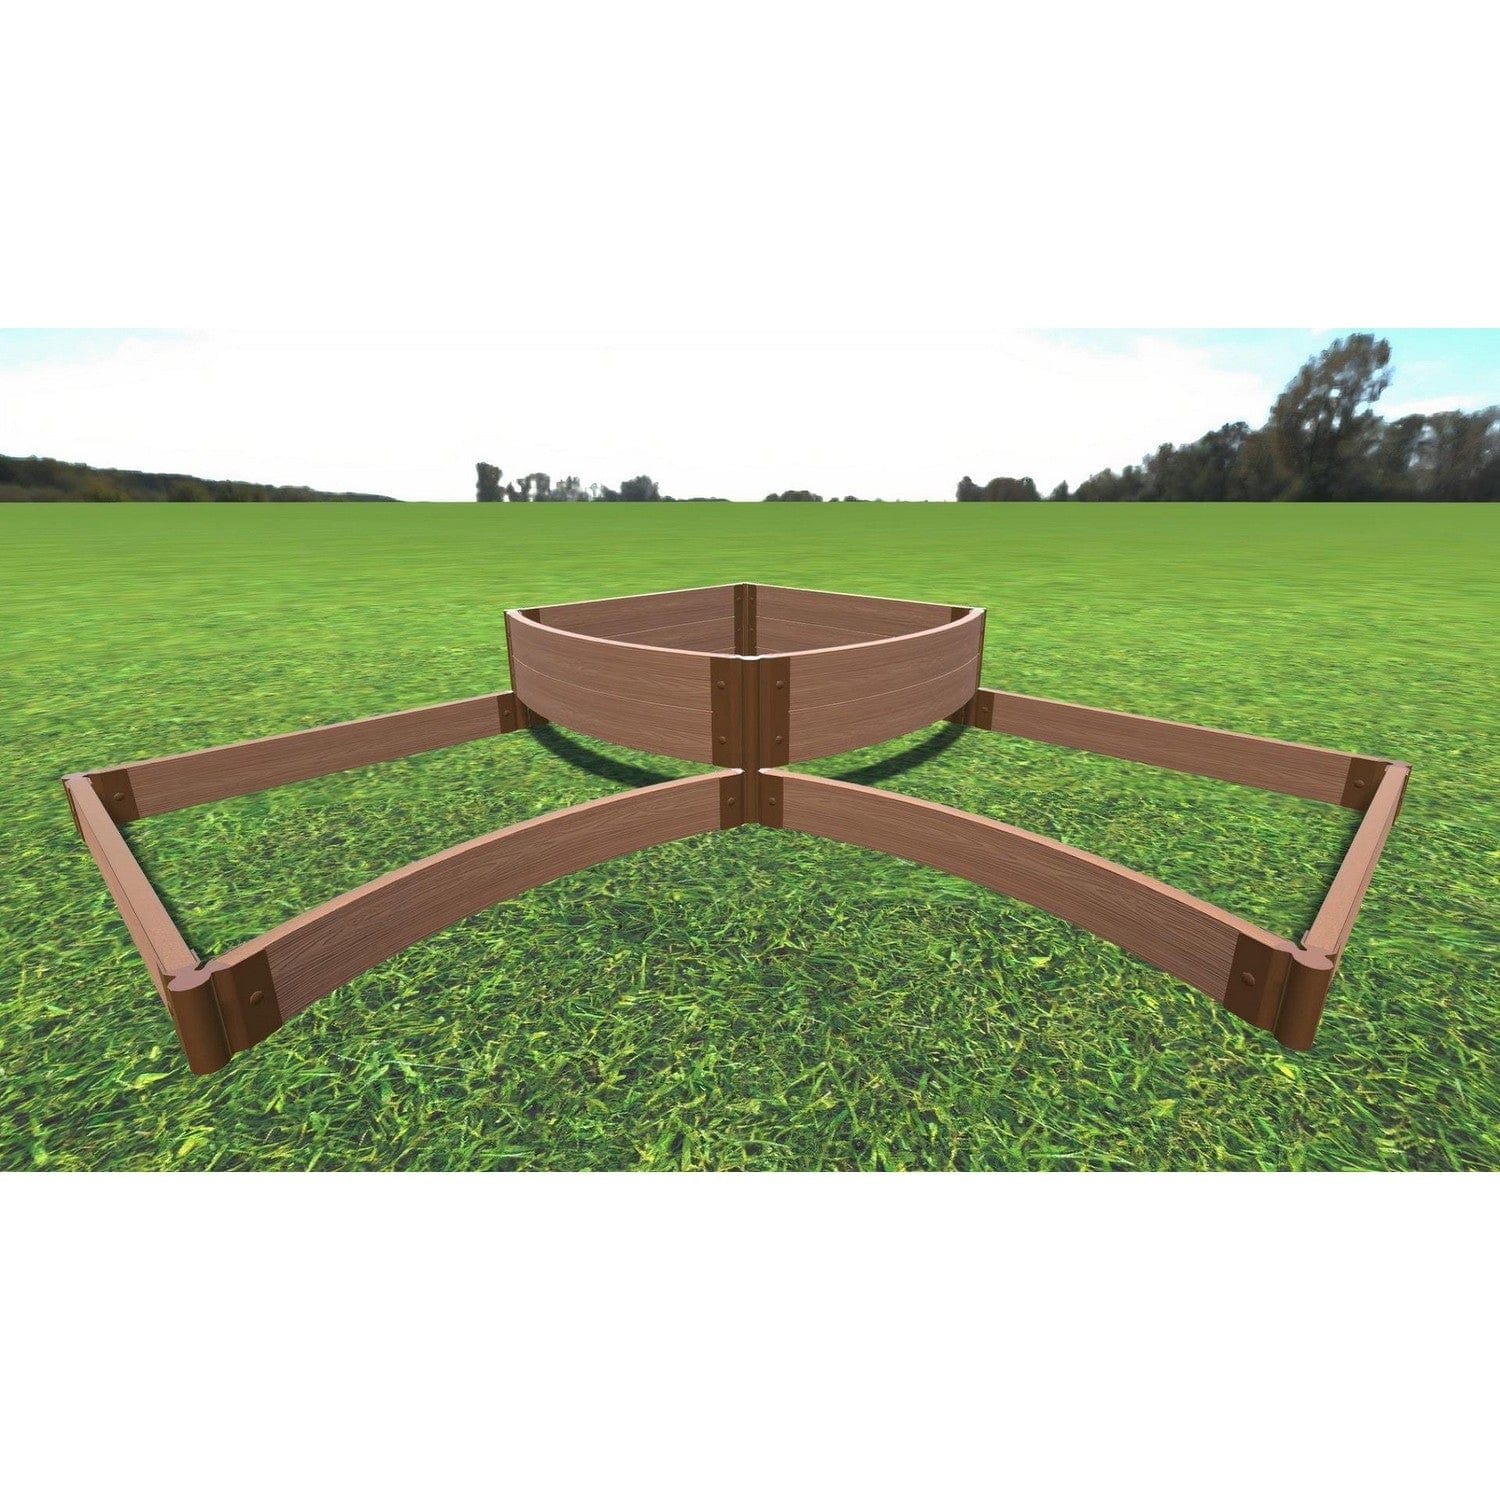 Frame It All Gardening Accessories Frame It All | Tool-Free Teardrop Curved Corner Raised Garden Bed (2-Tier) 8' X 8' X 5.5" - Classic Sienna - 2" Profile 800001009